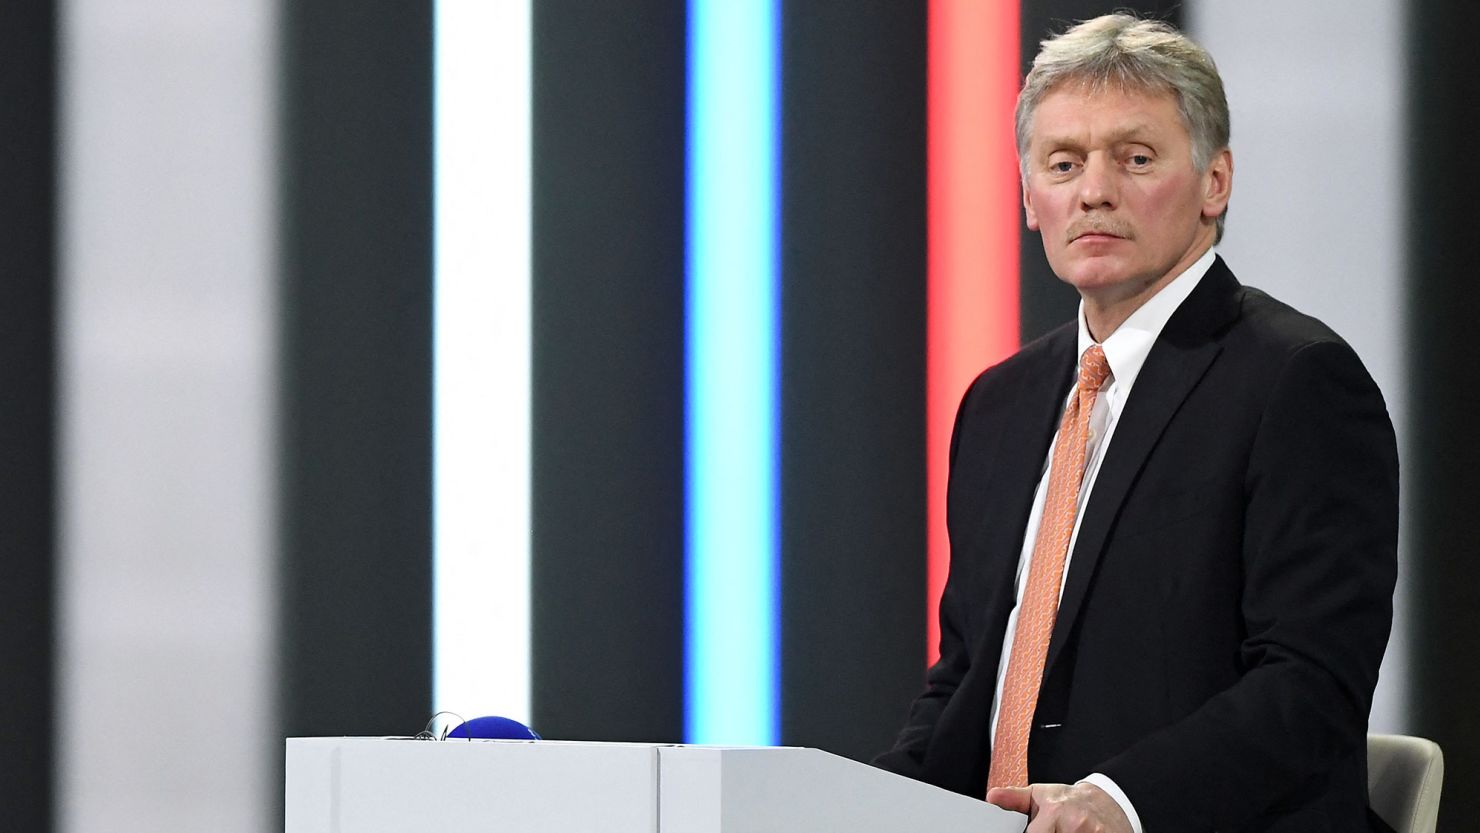 Kremlin spokesman Dmitry Peskov said the Kremlin considers it unnecessary to publicly disclose the details of prisoner swap negotiations between Russia and the US.